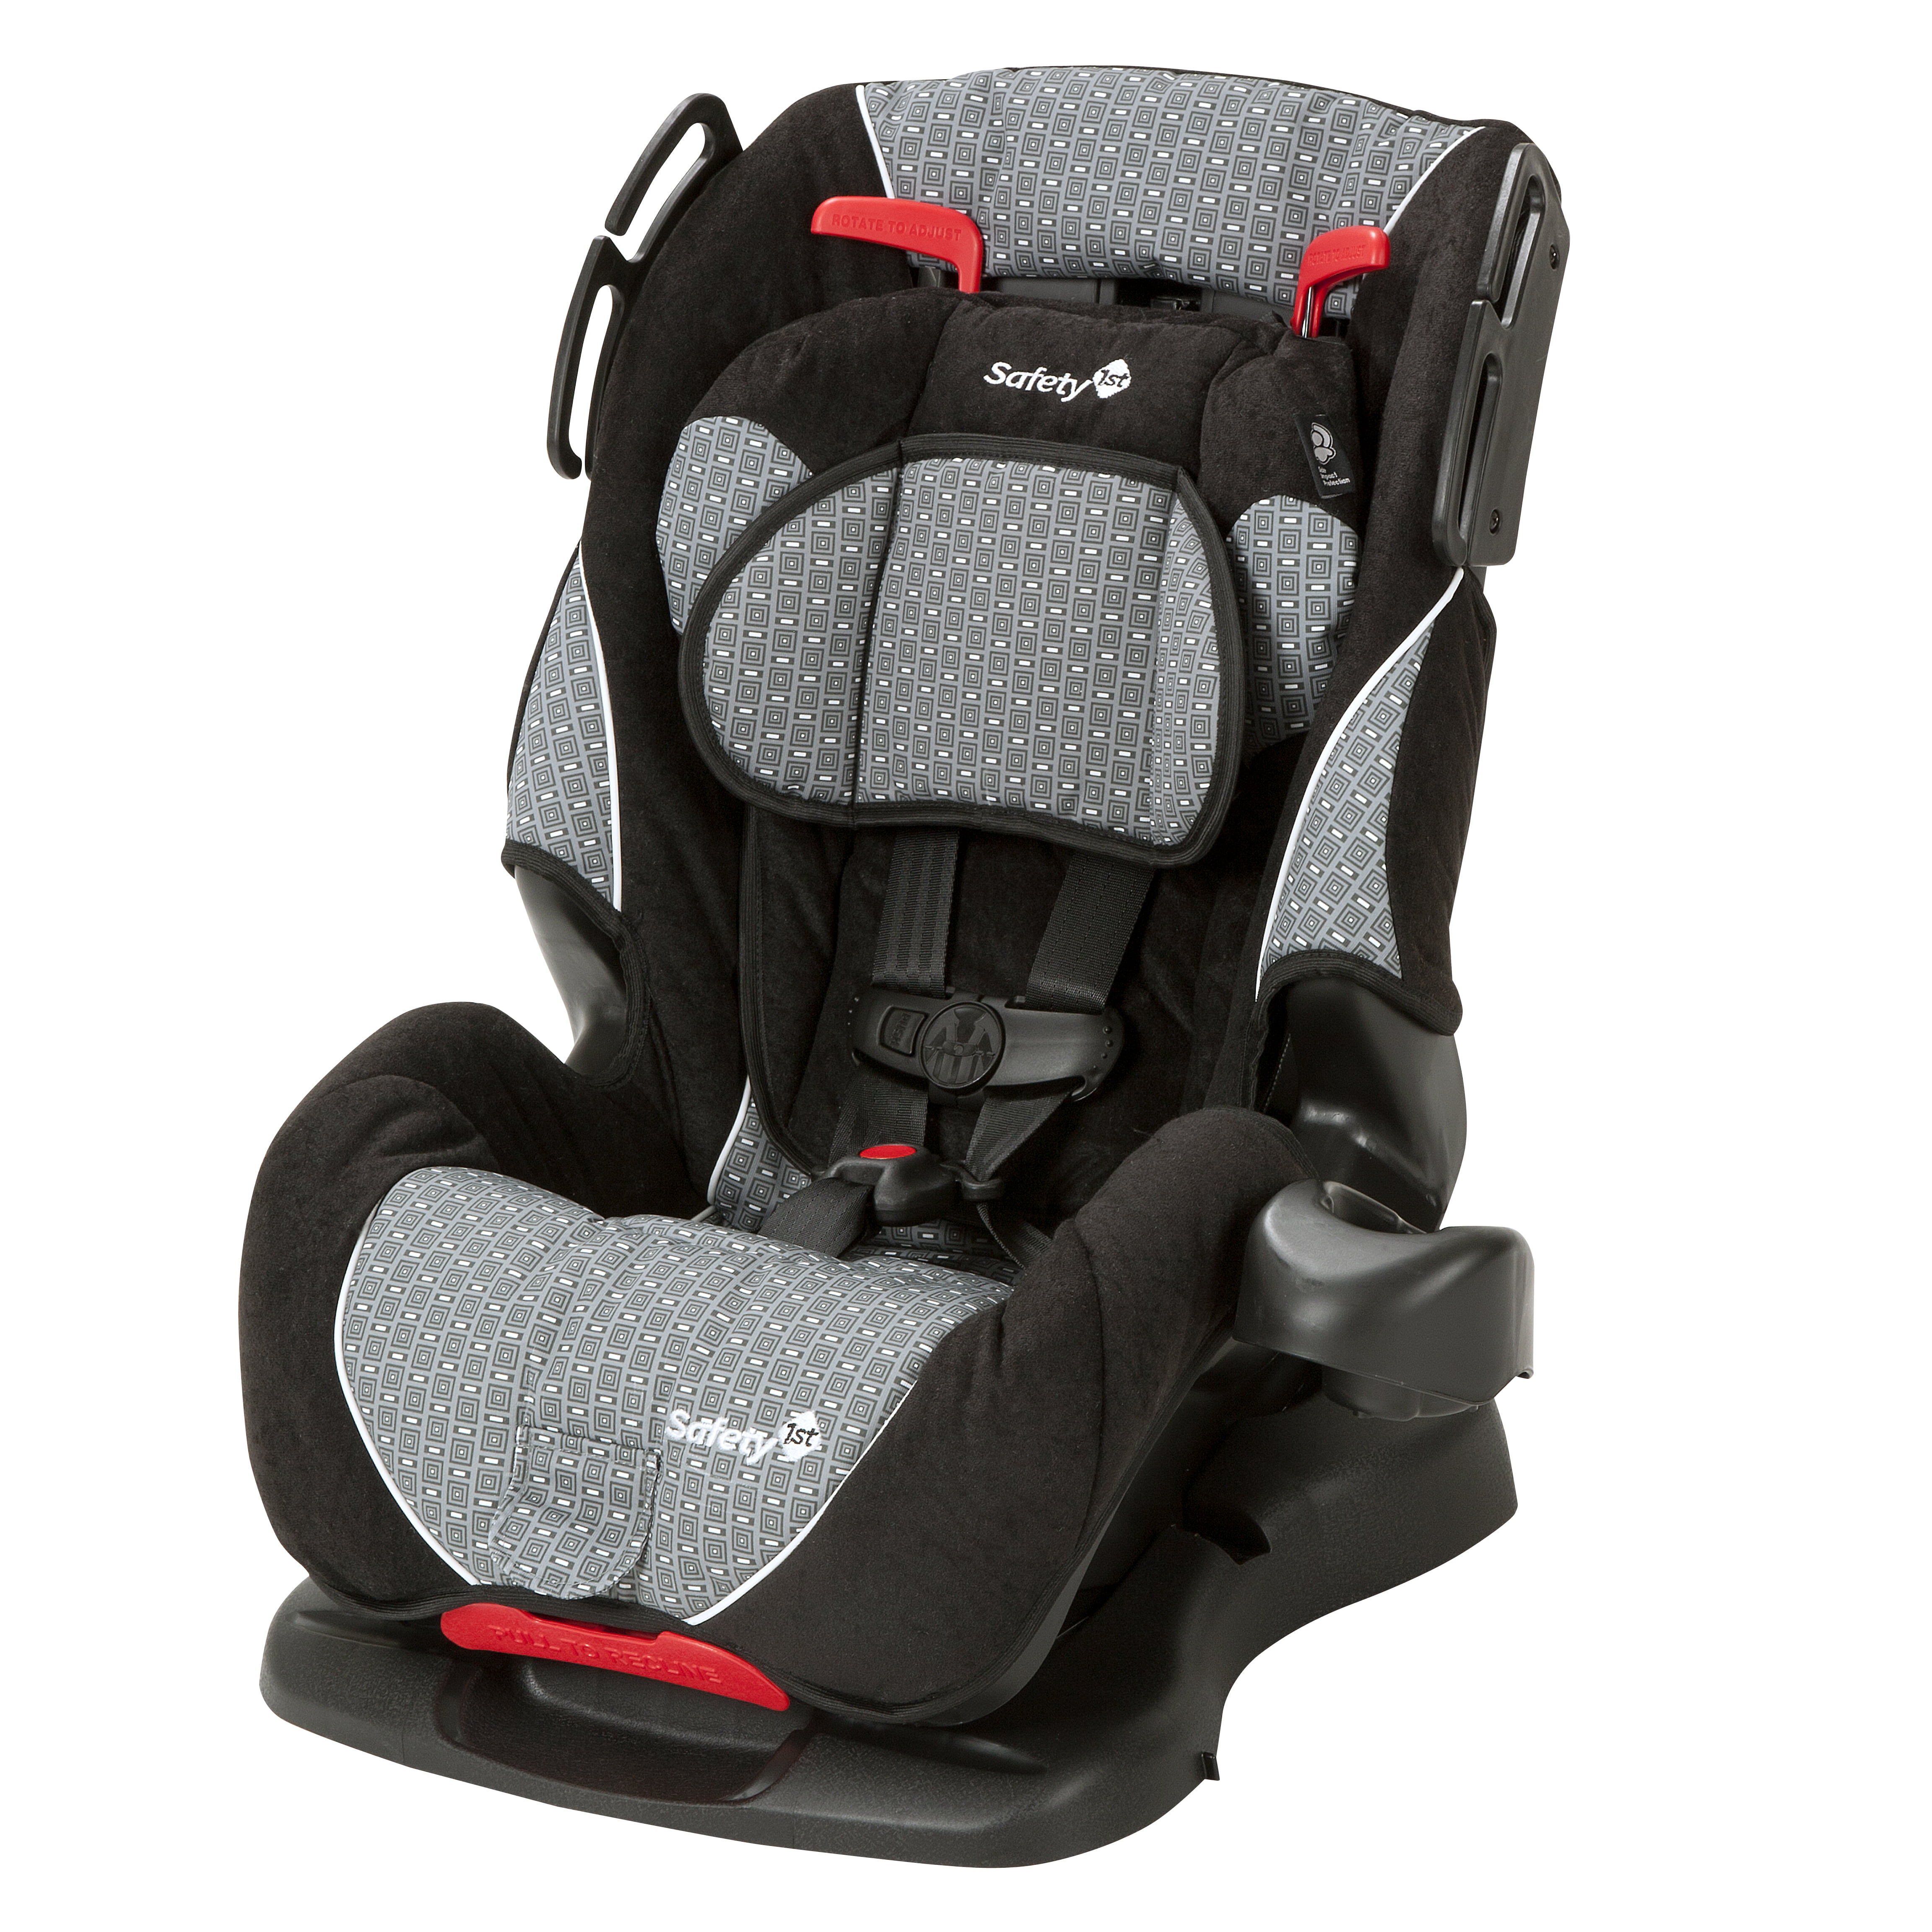 Safety 1st All-in-One Convertible Kids Children Car Seat Infant Toddler